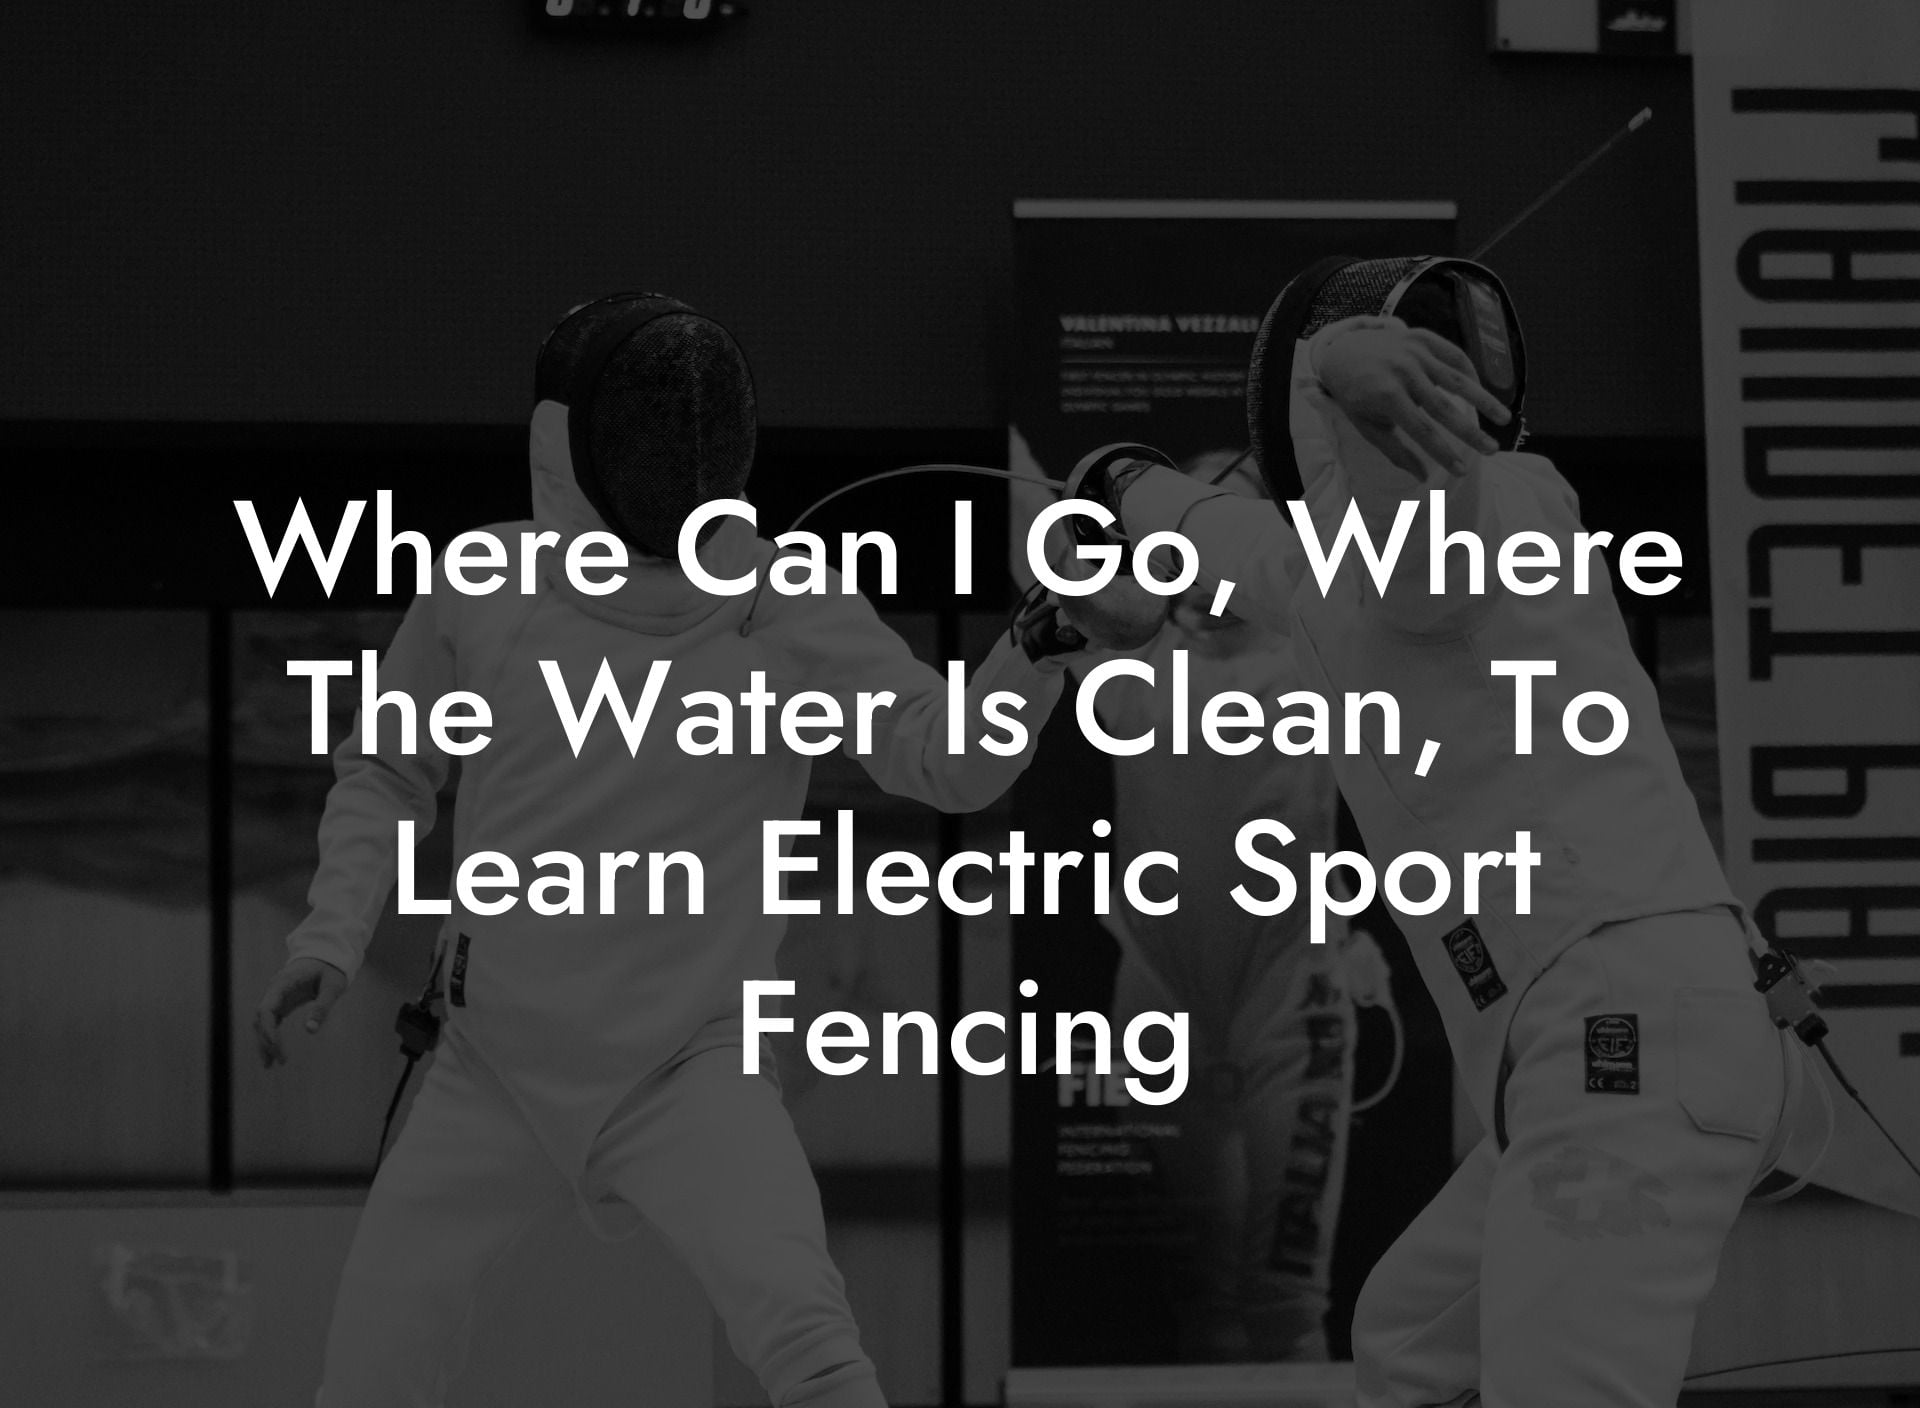 Where Can I Go, Where The Water Is Clean, To Learn Electric Sport Fencing